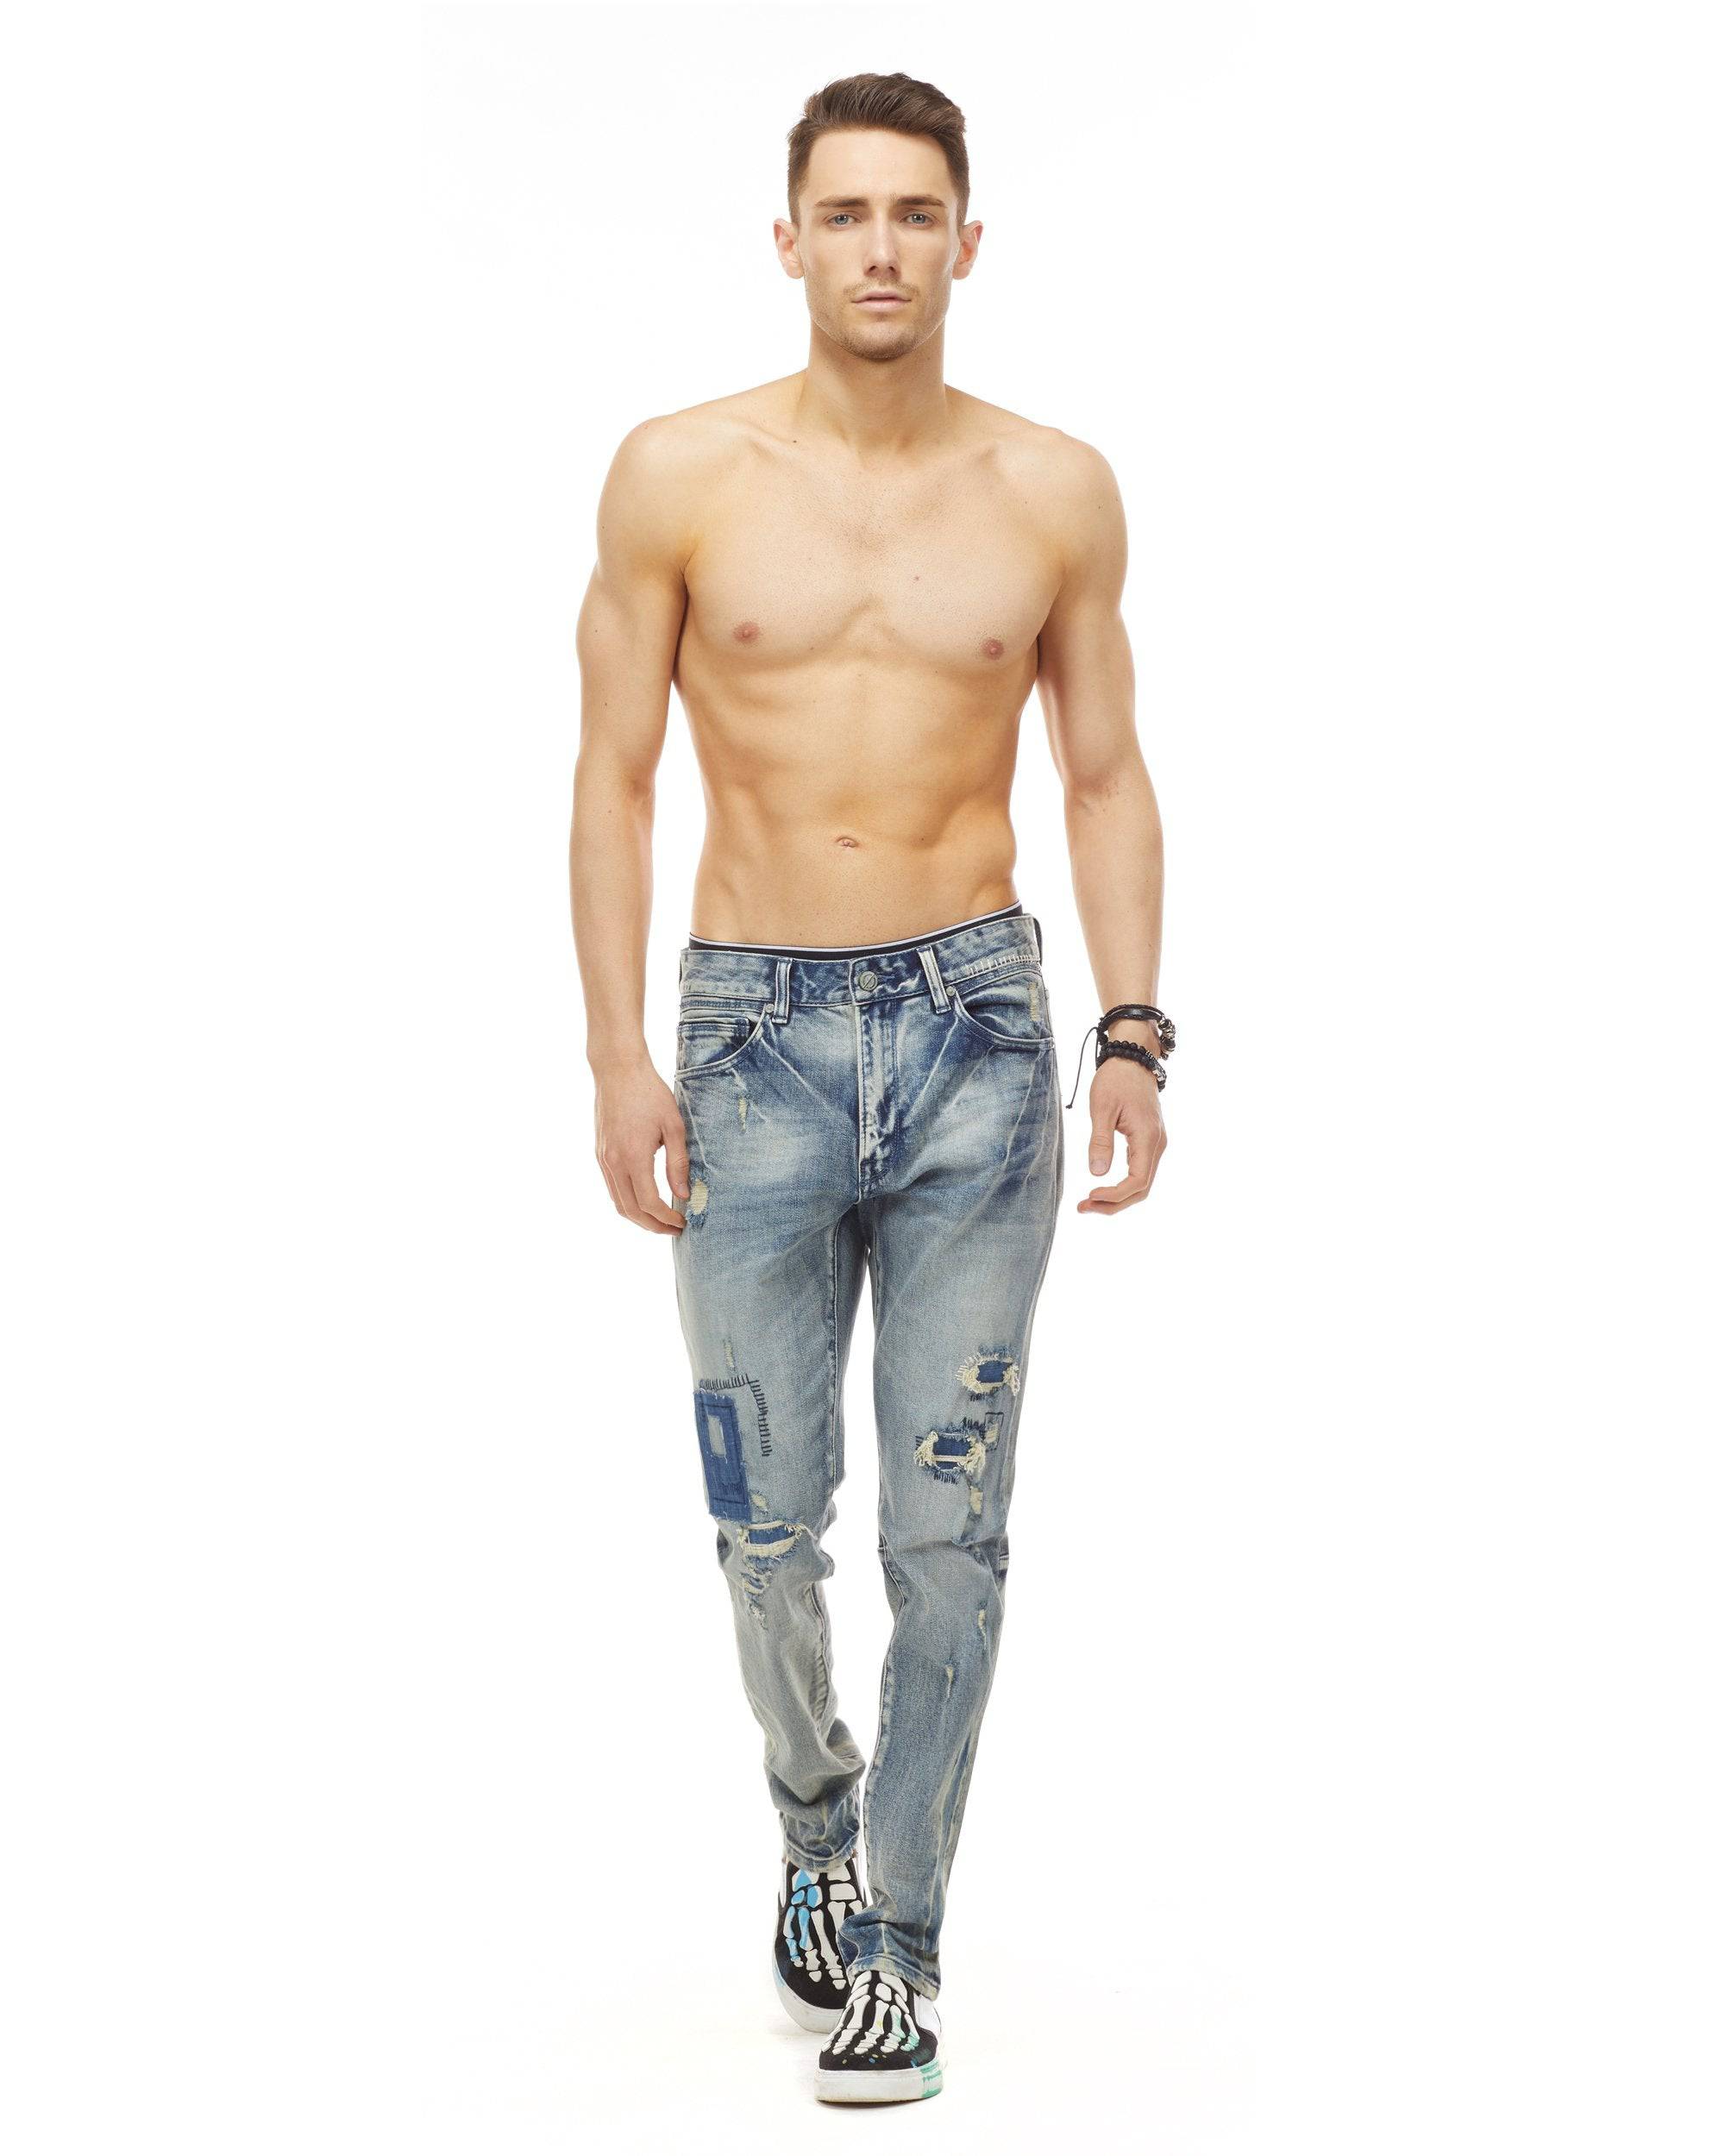 Bleunoir Distressed Jeans - Astral Blue - Smoke Rise